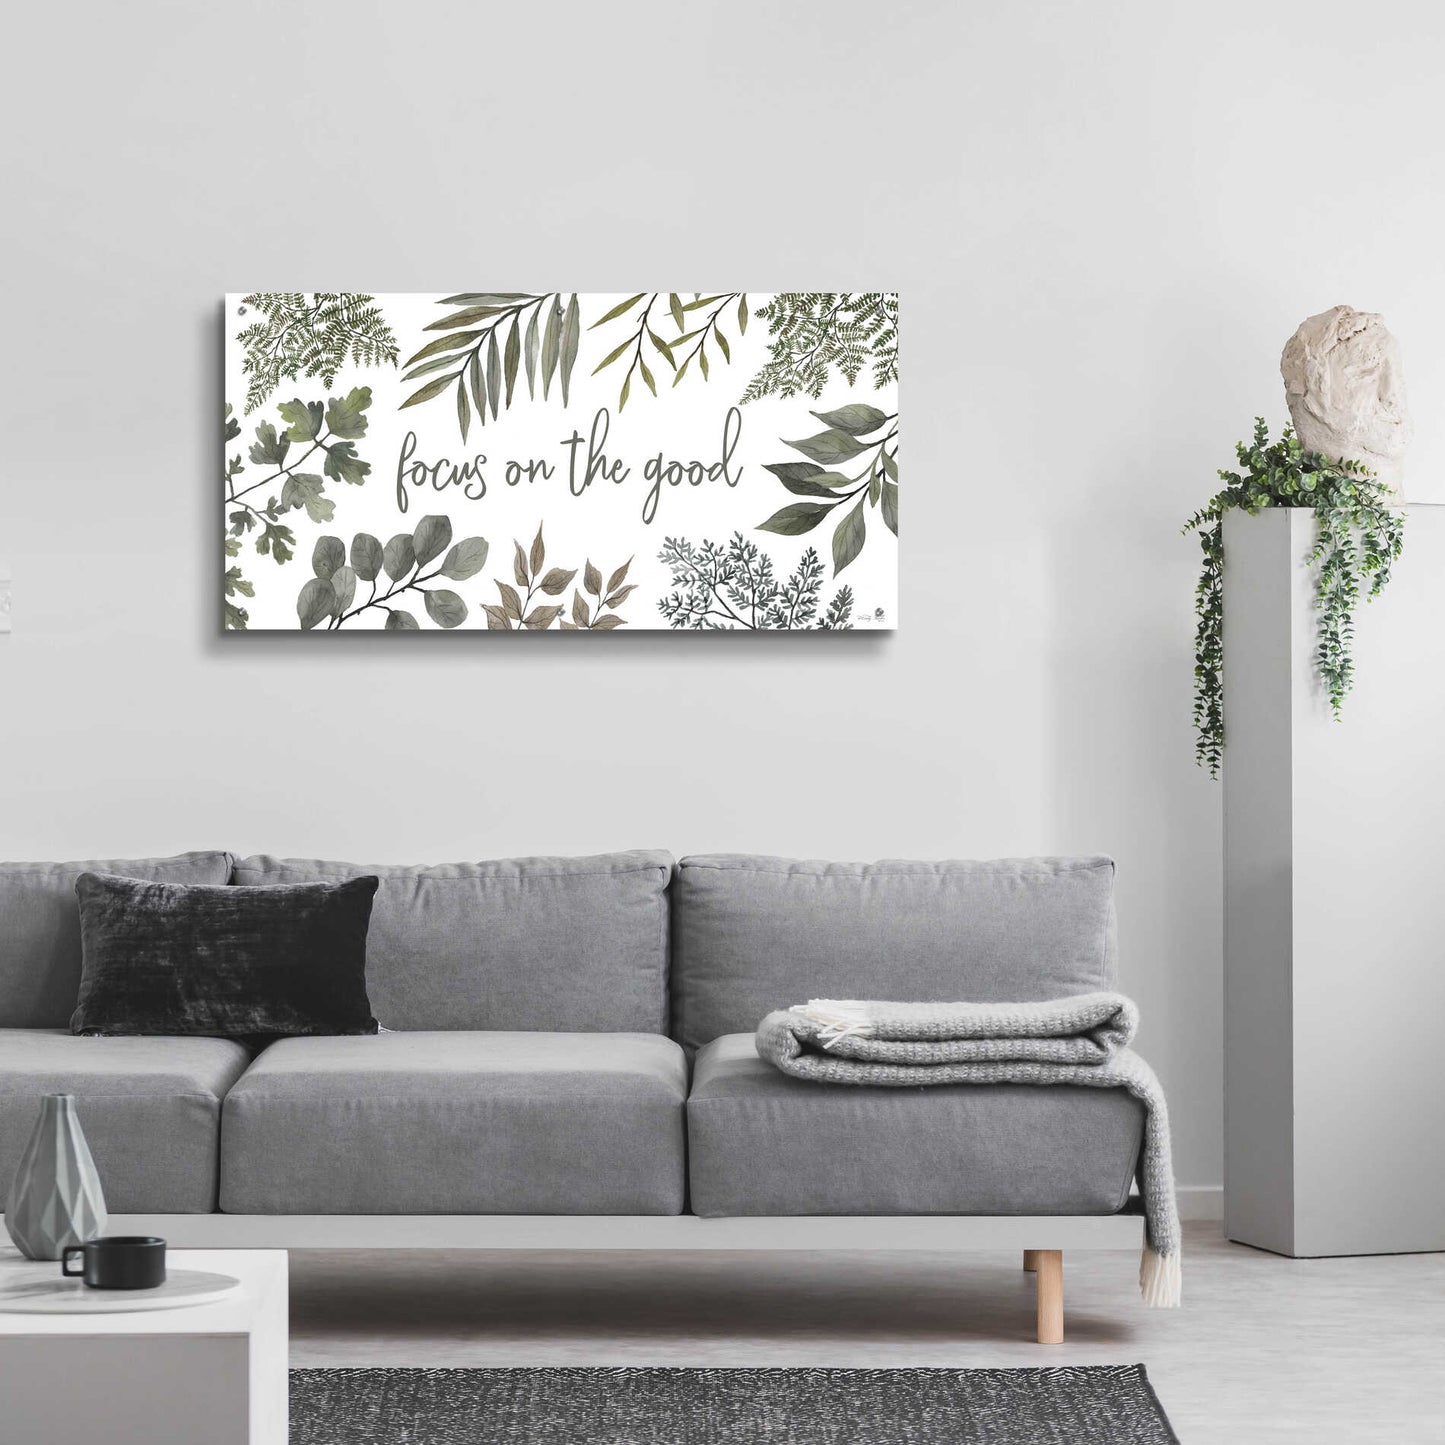 Epic Art 'Focus on the Good' by Cindy Jacobs, Acrylic Glass Wall Art,48x24